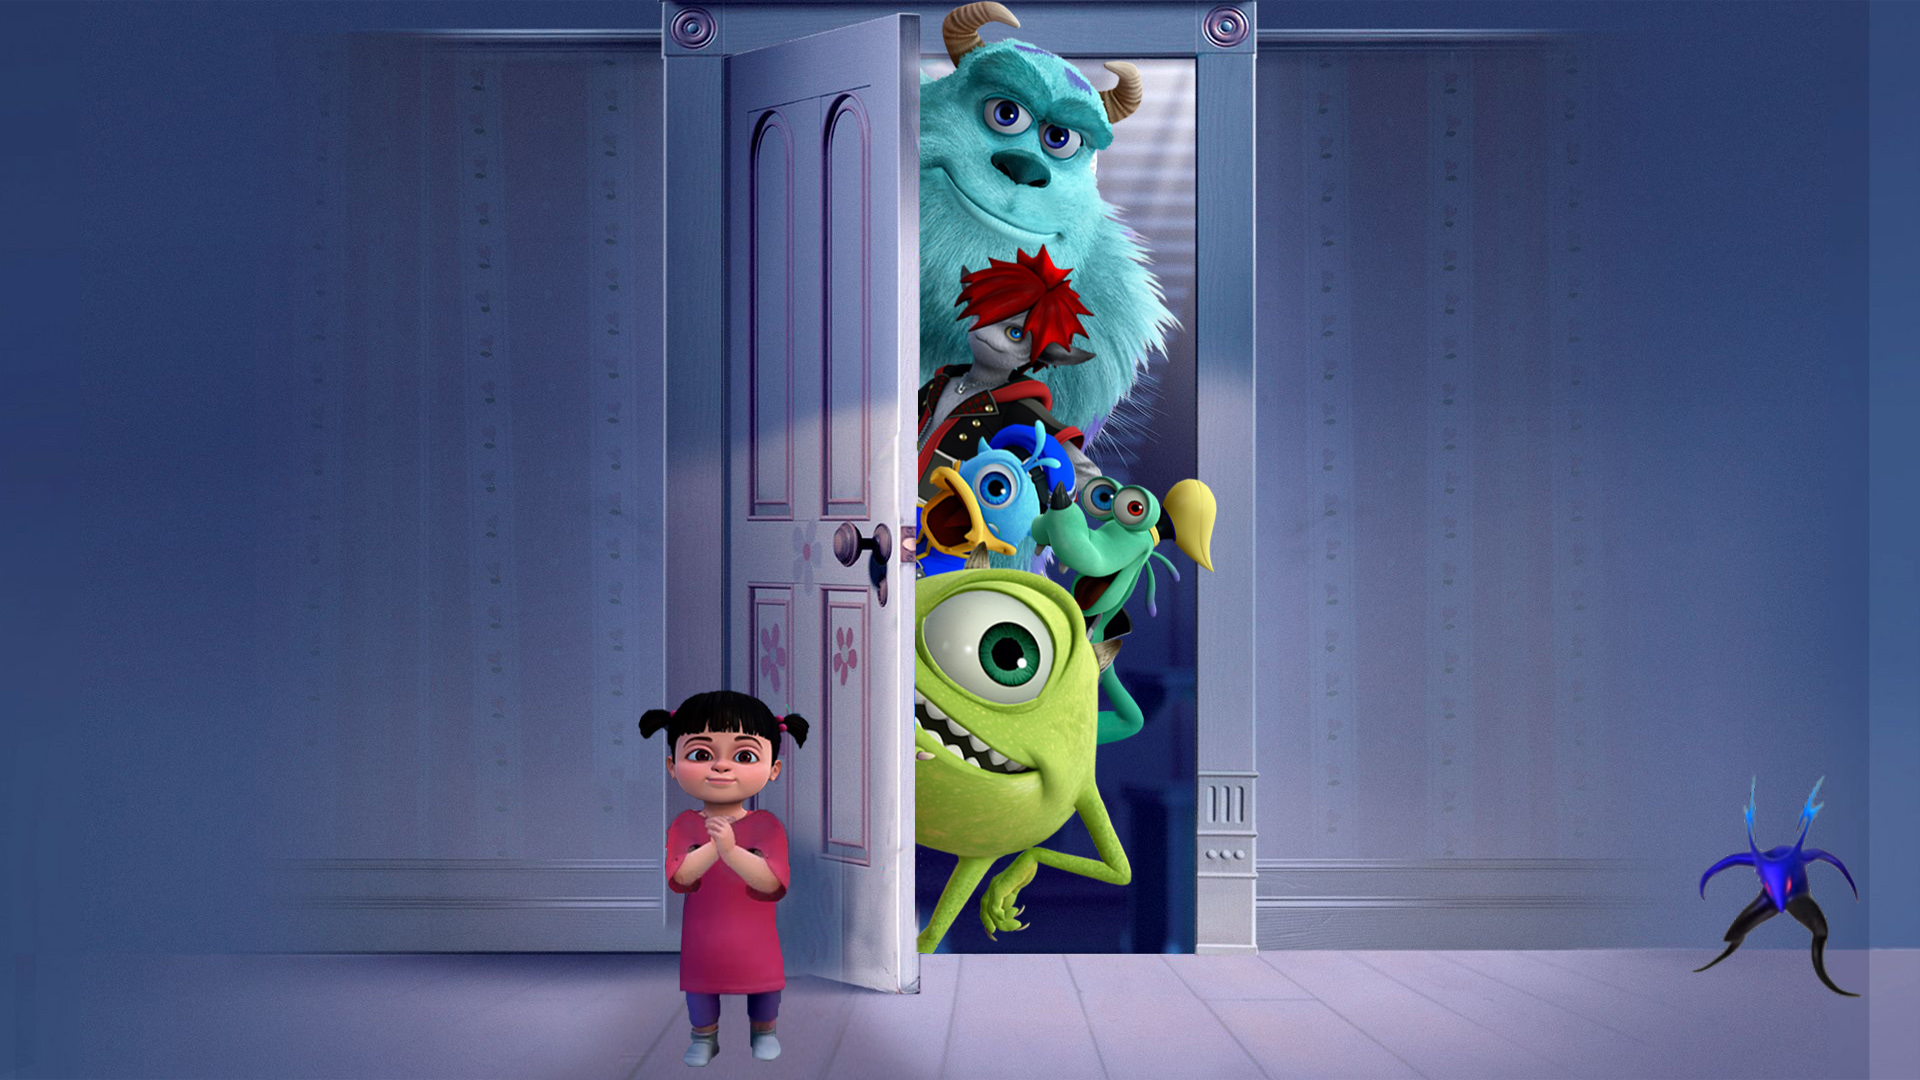 Characters from Monsters, Inc. 